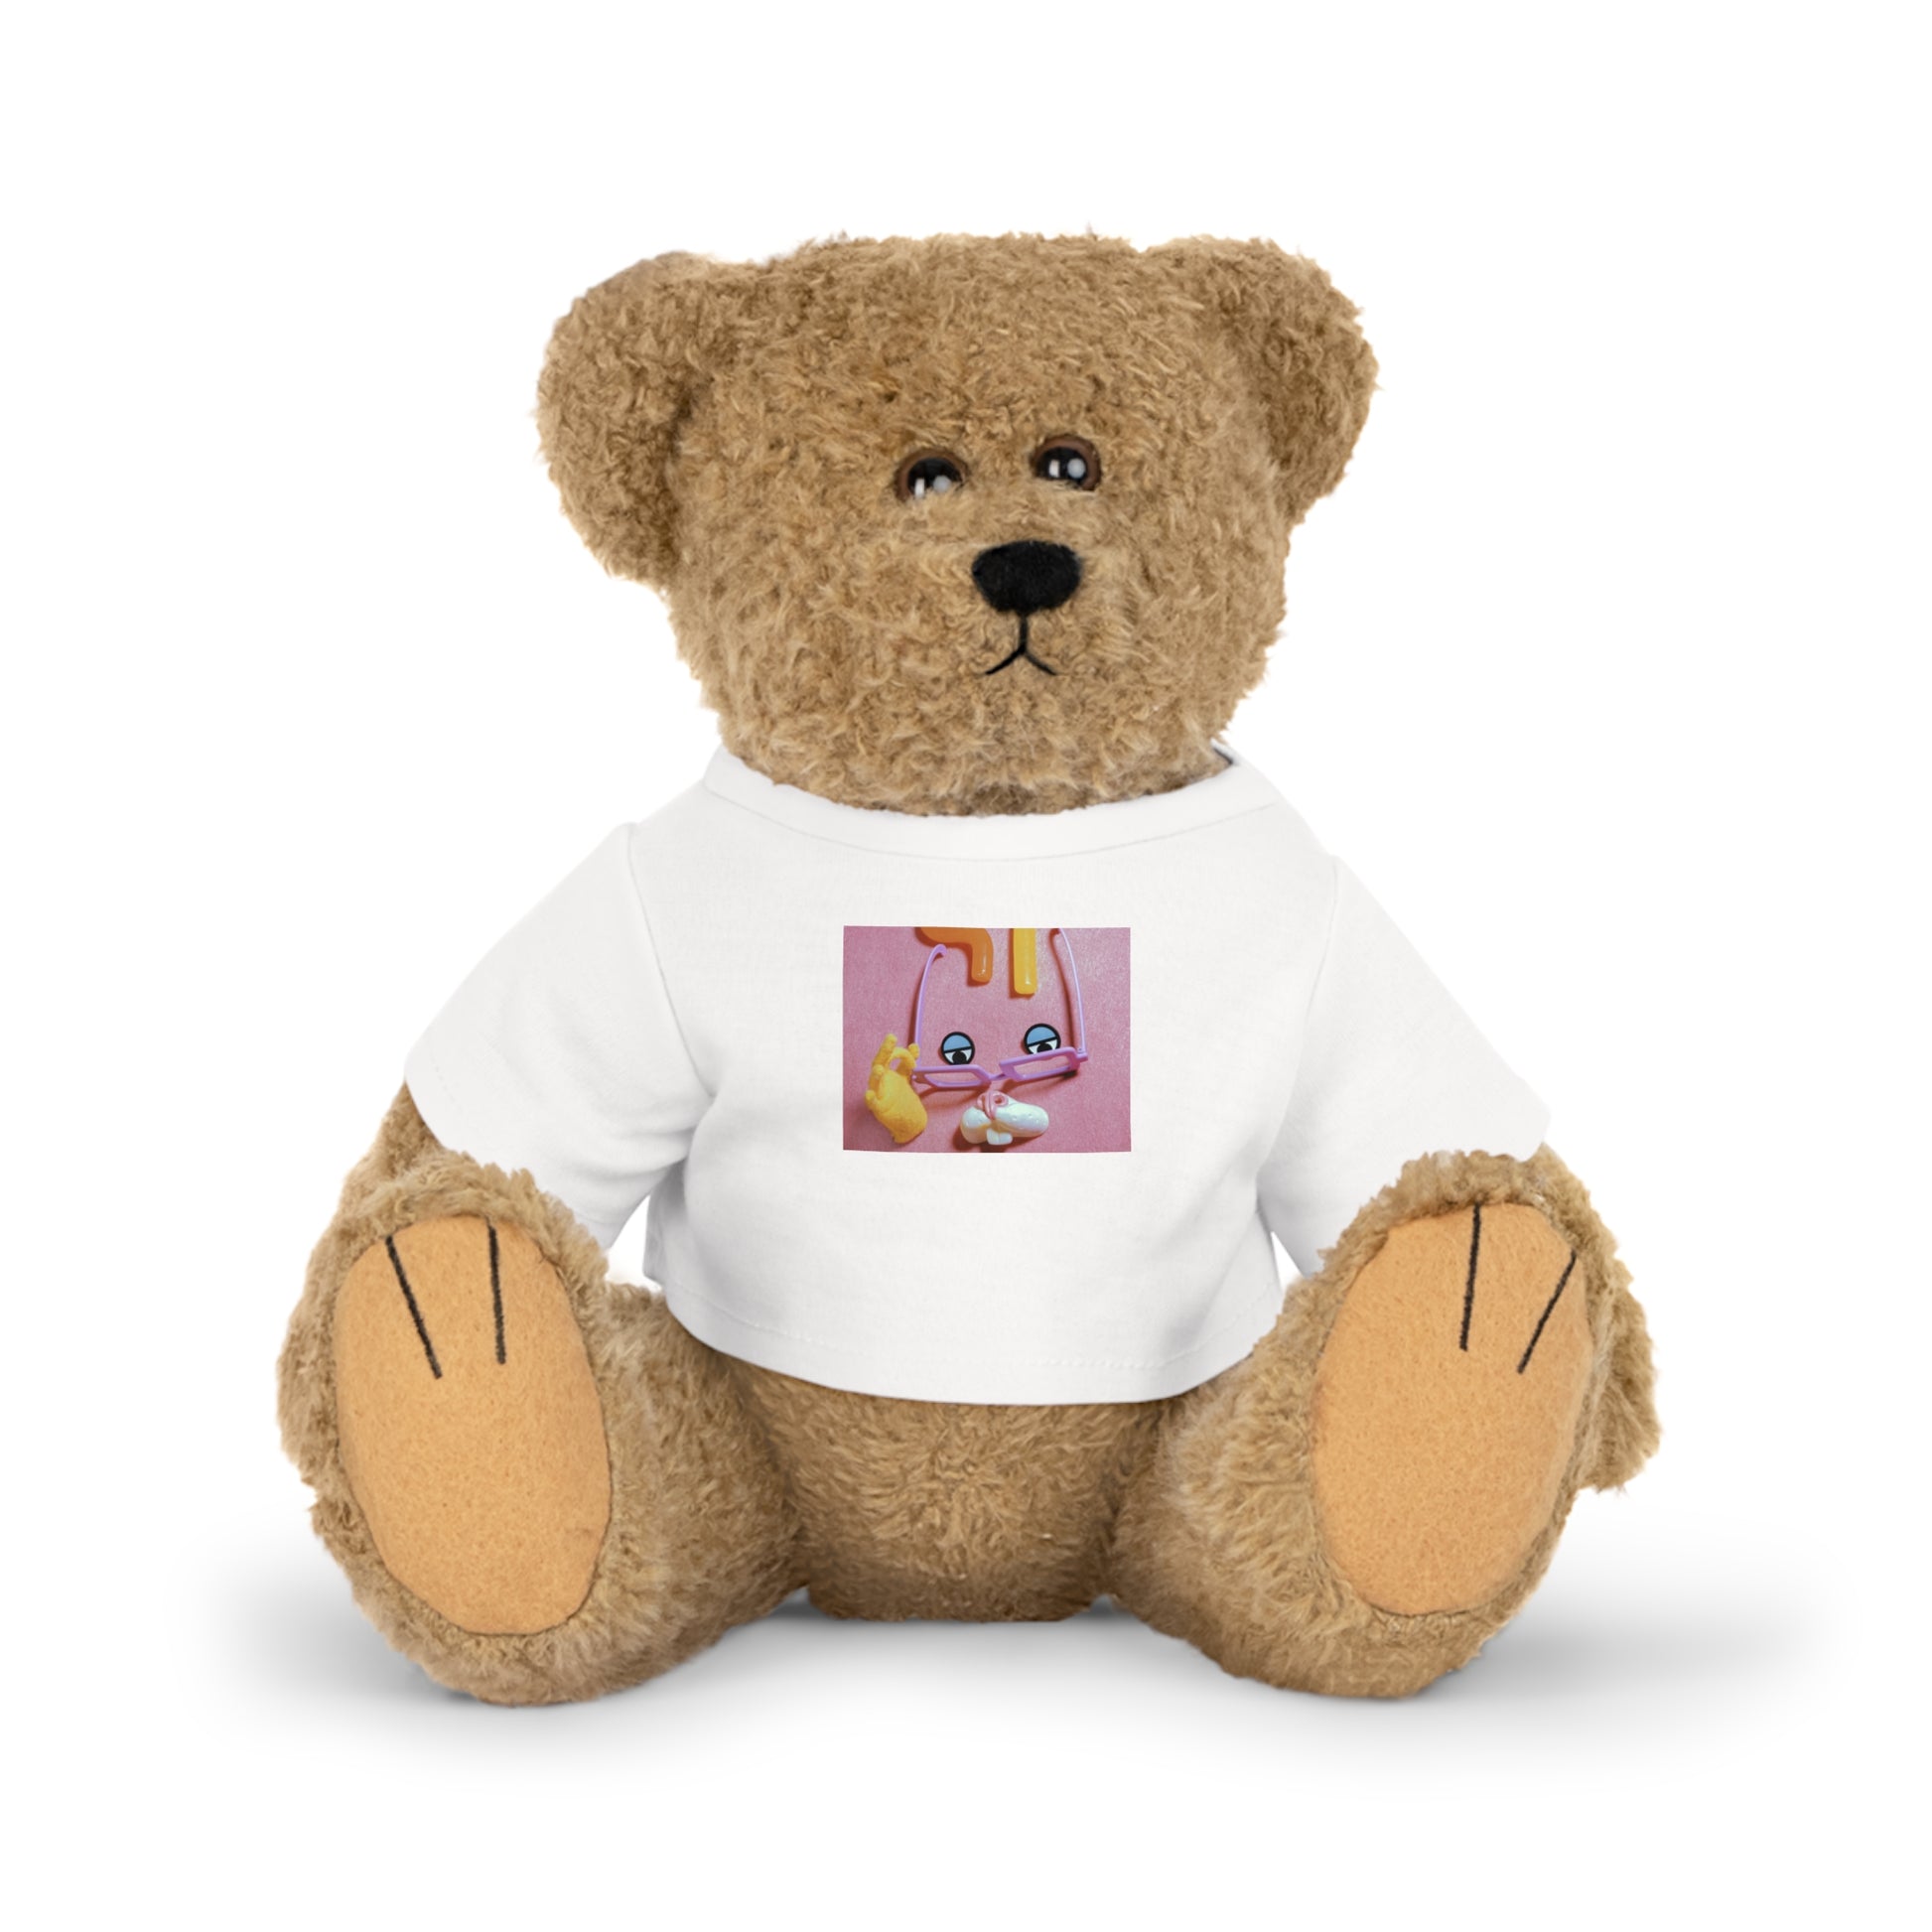 personalised teddy bear, personalized gifts for him, personalized gifts for her